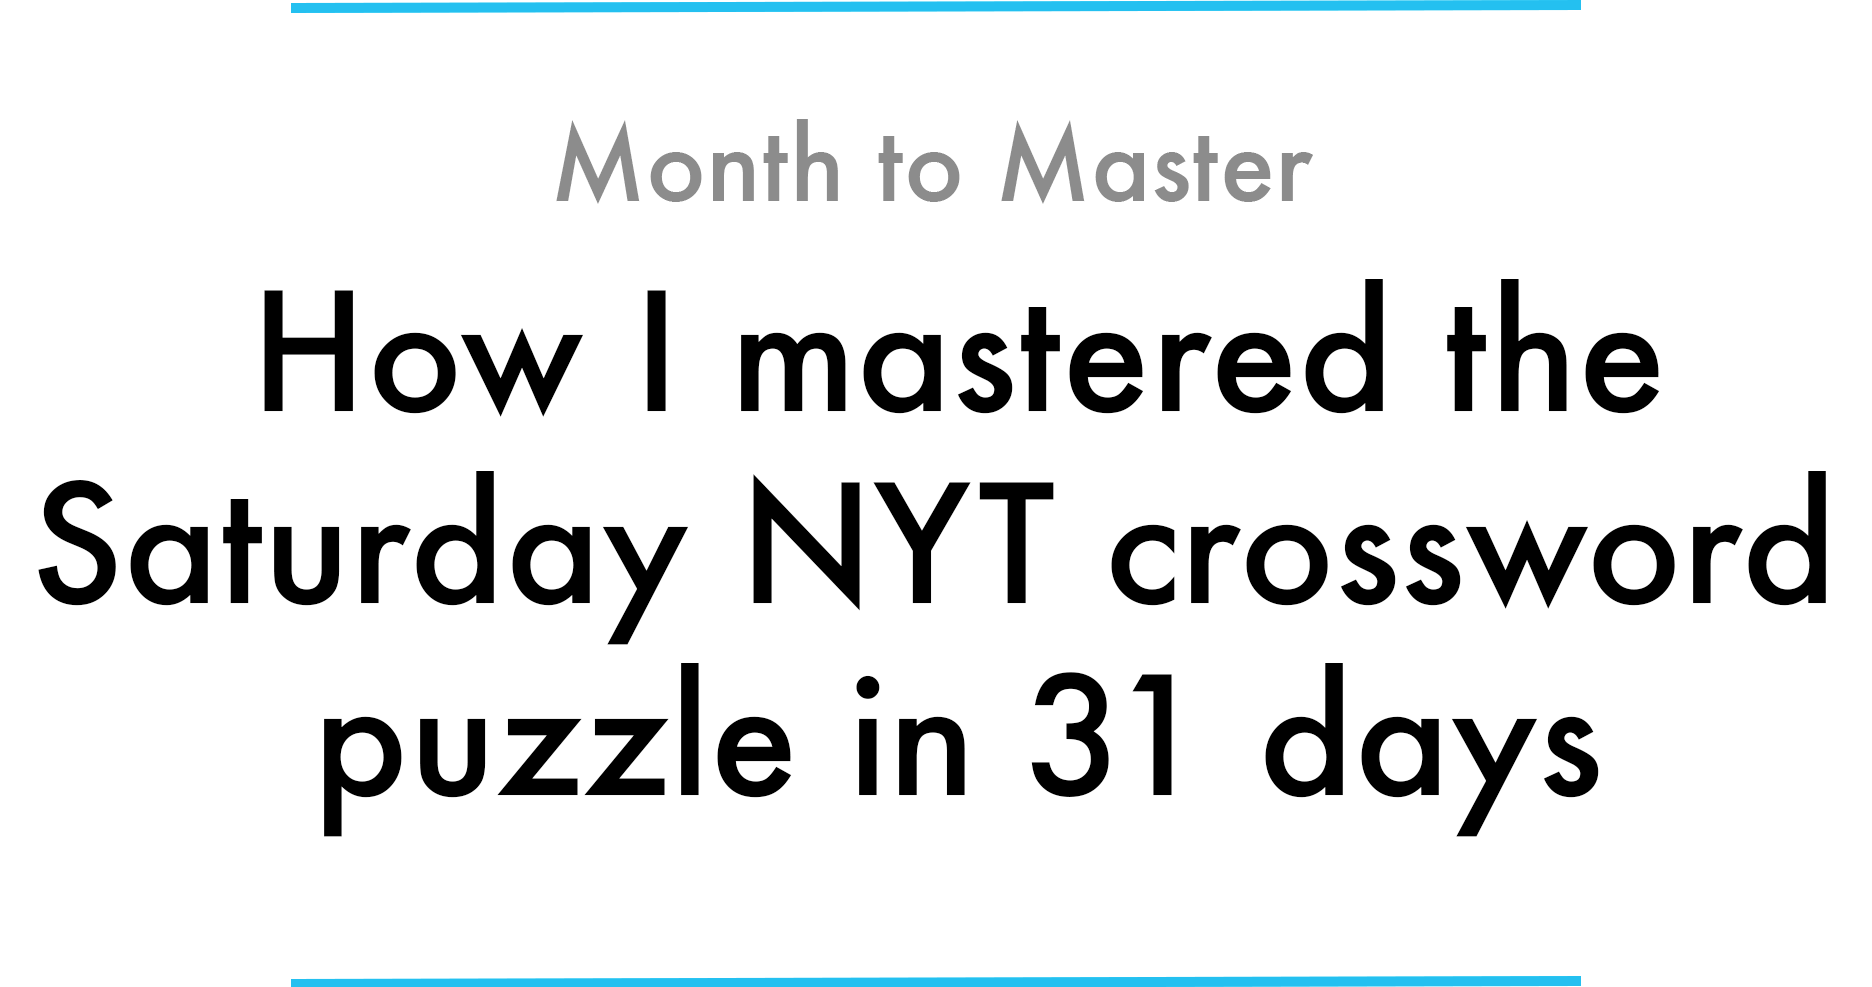 How I mastered the Saturday NYT crossword puzzle in 31 days | by Max  Deutsch | Medium